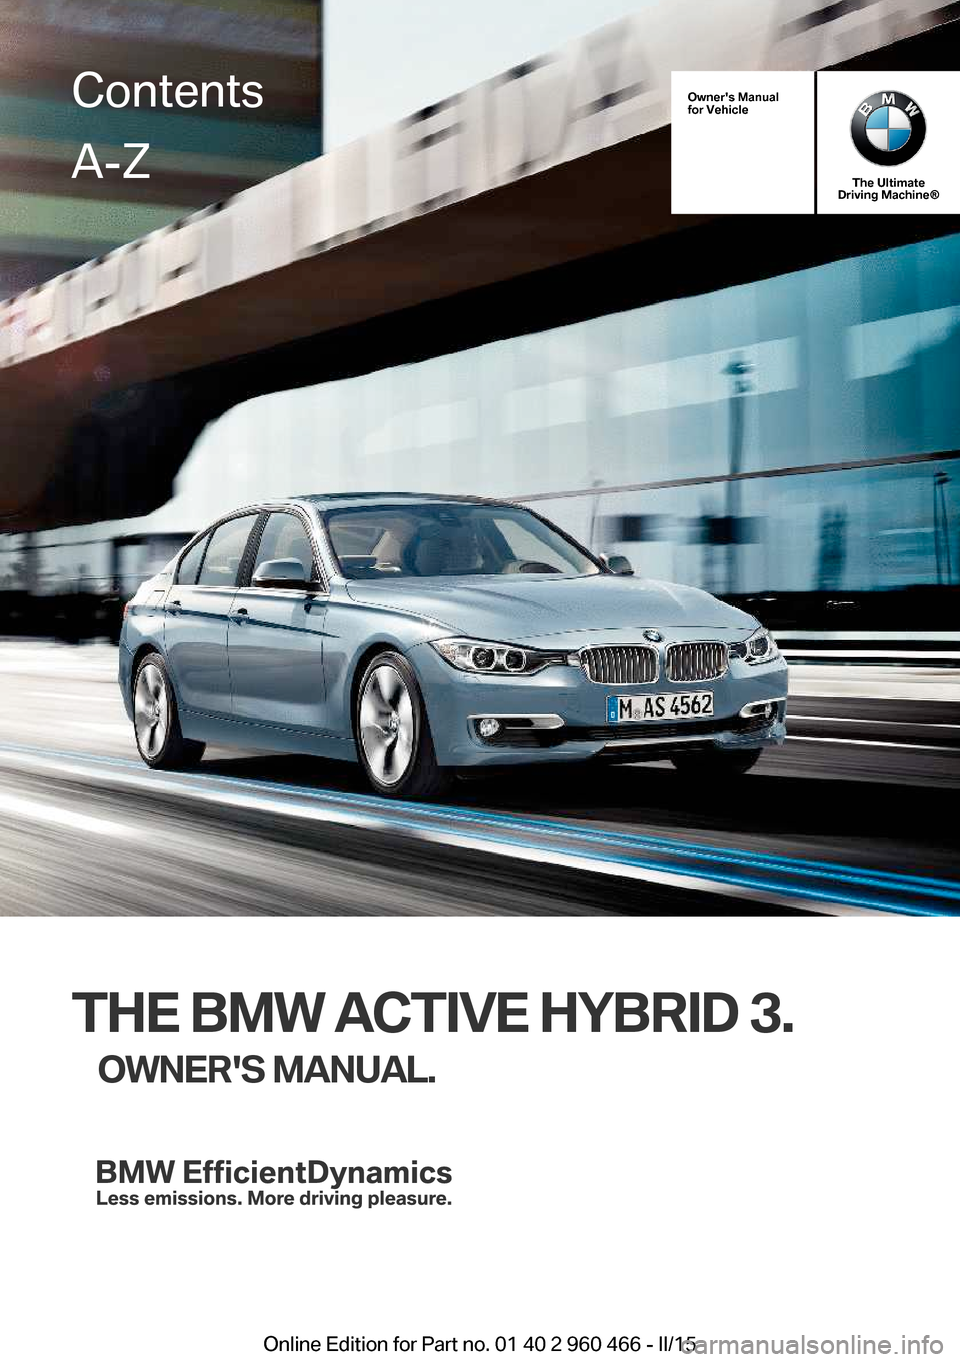 BMW ACTIVE HYBRID 3 2015 F30H Owners Manual Owners Manual
for Vehicle
The Ultimate
Driving Machine®
THE BMW ACTIVE HYBRID 3.
OWNERS MANUAL.
ContentsA-Z
Online Edition for Part no. 01 40 2 960 466 - II/15   